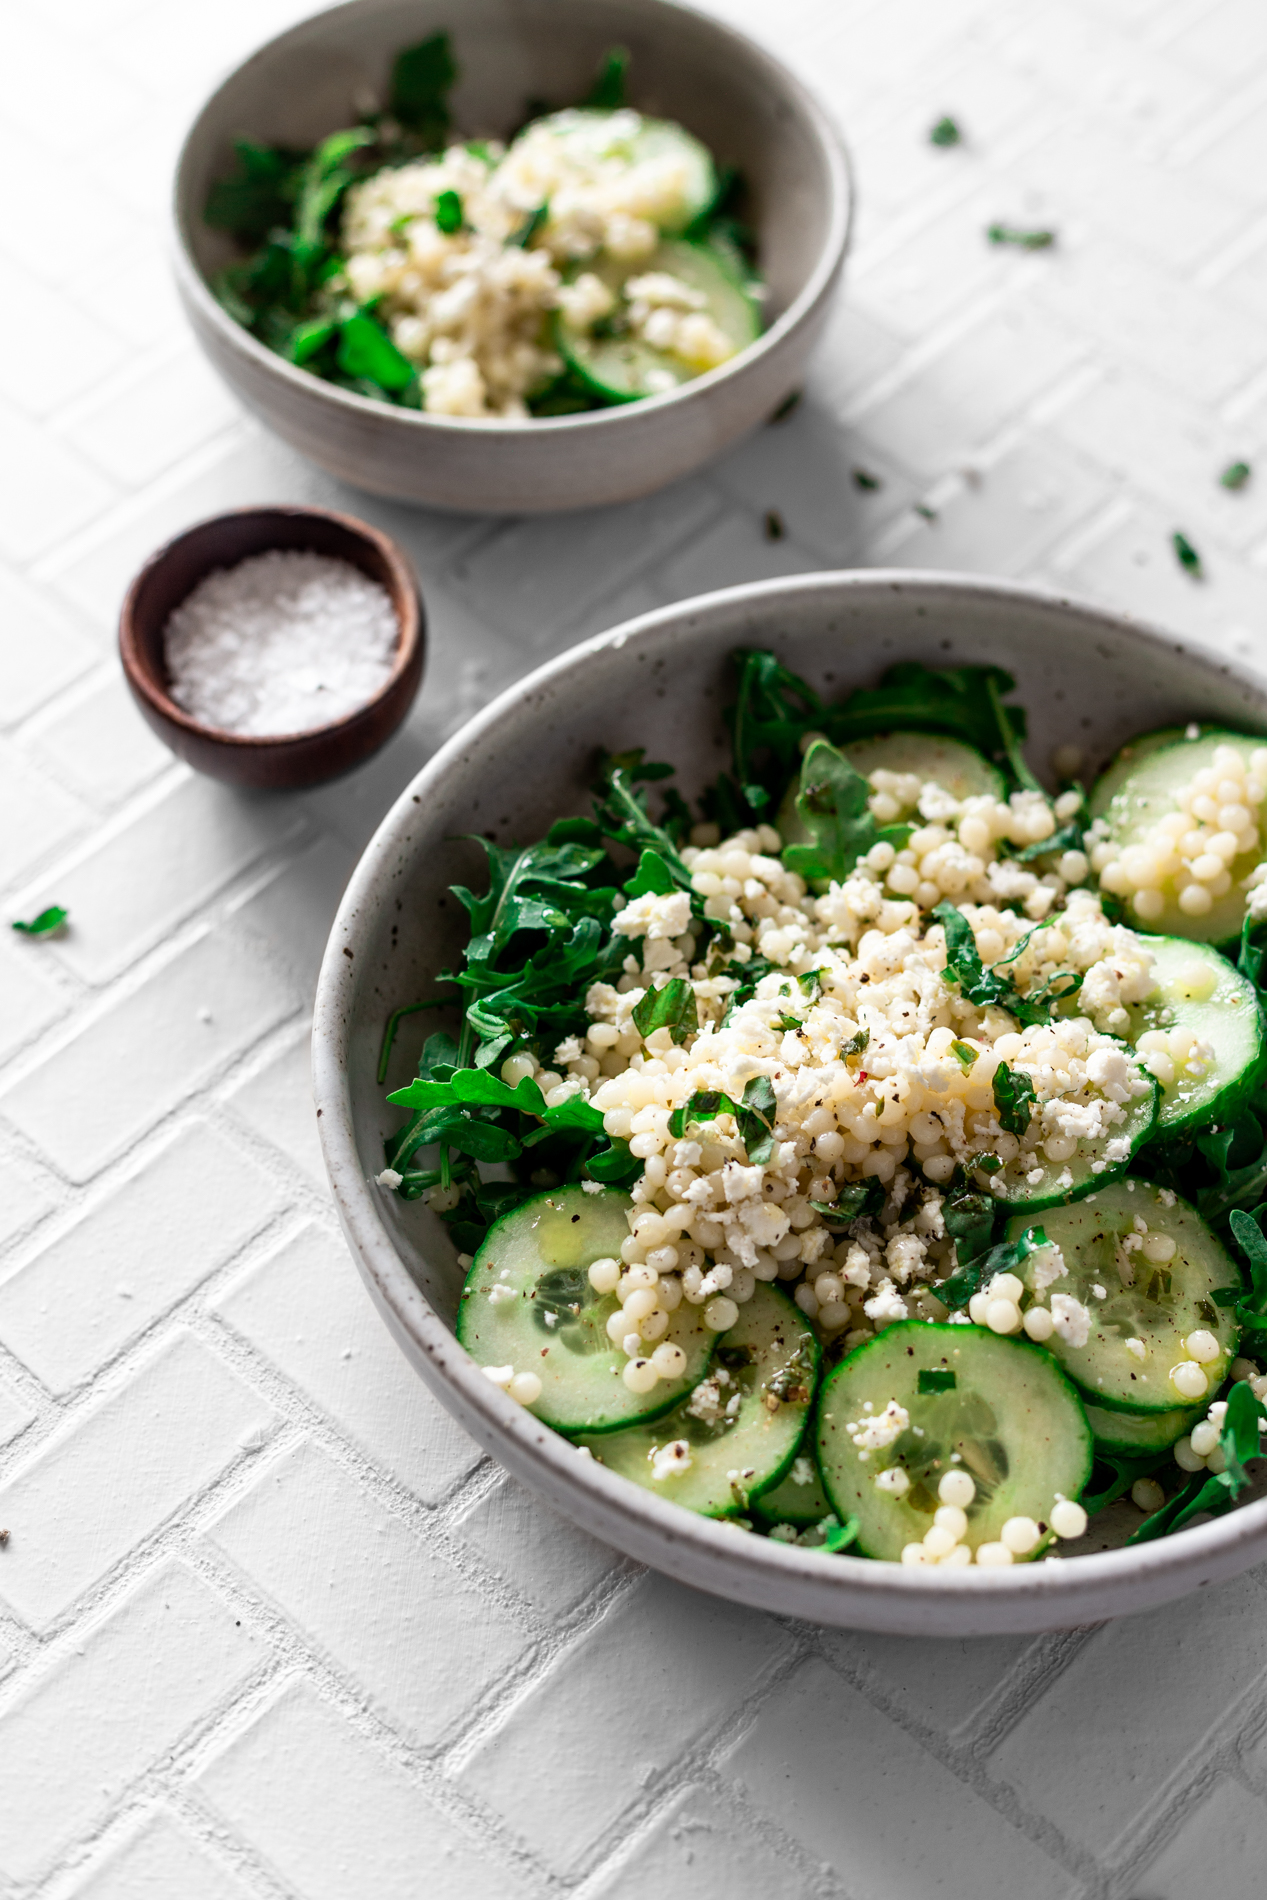 angled view of two bowls of cucumber salad recipe with lemon basil vinaigrette with a small bowl of flake sea salt